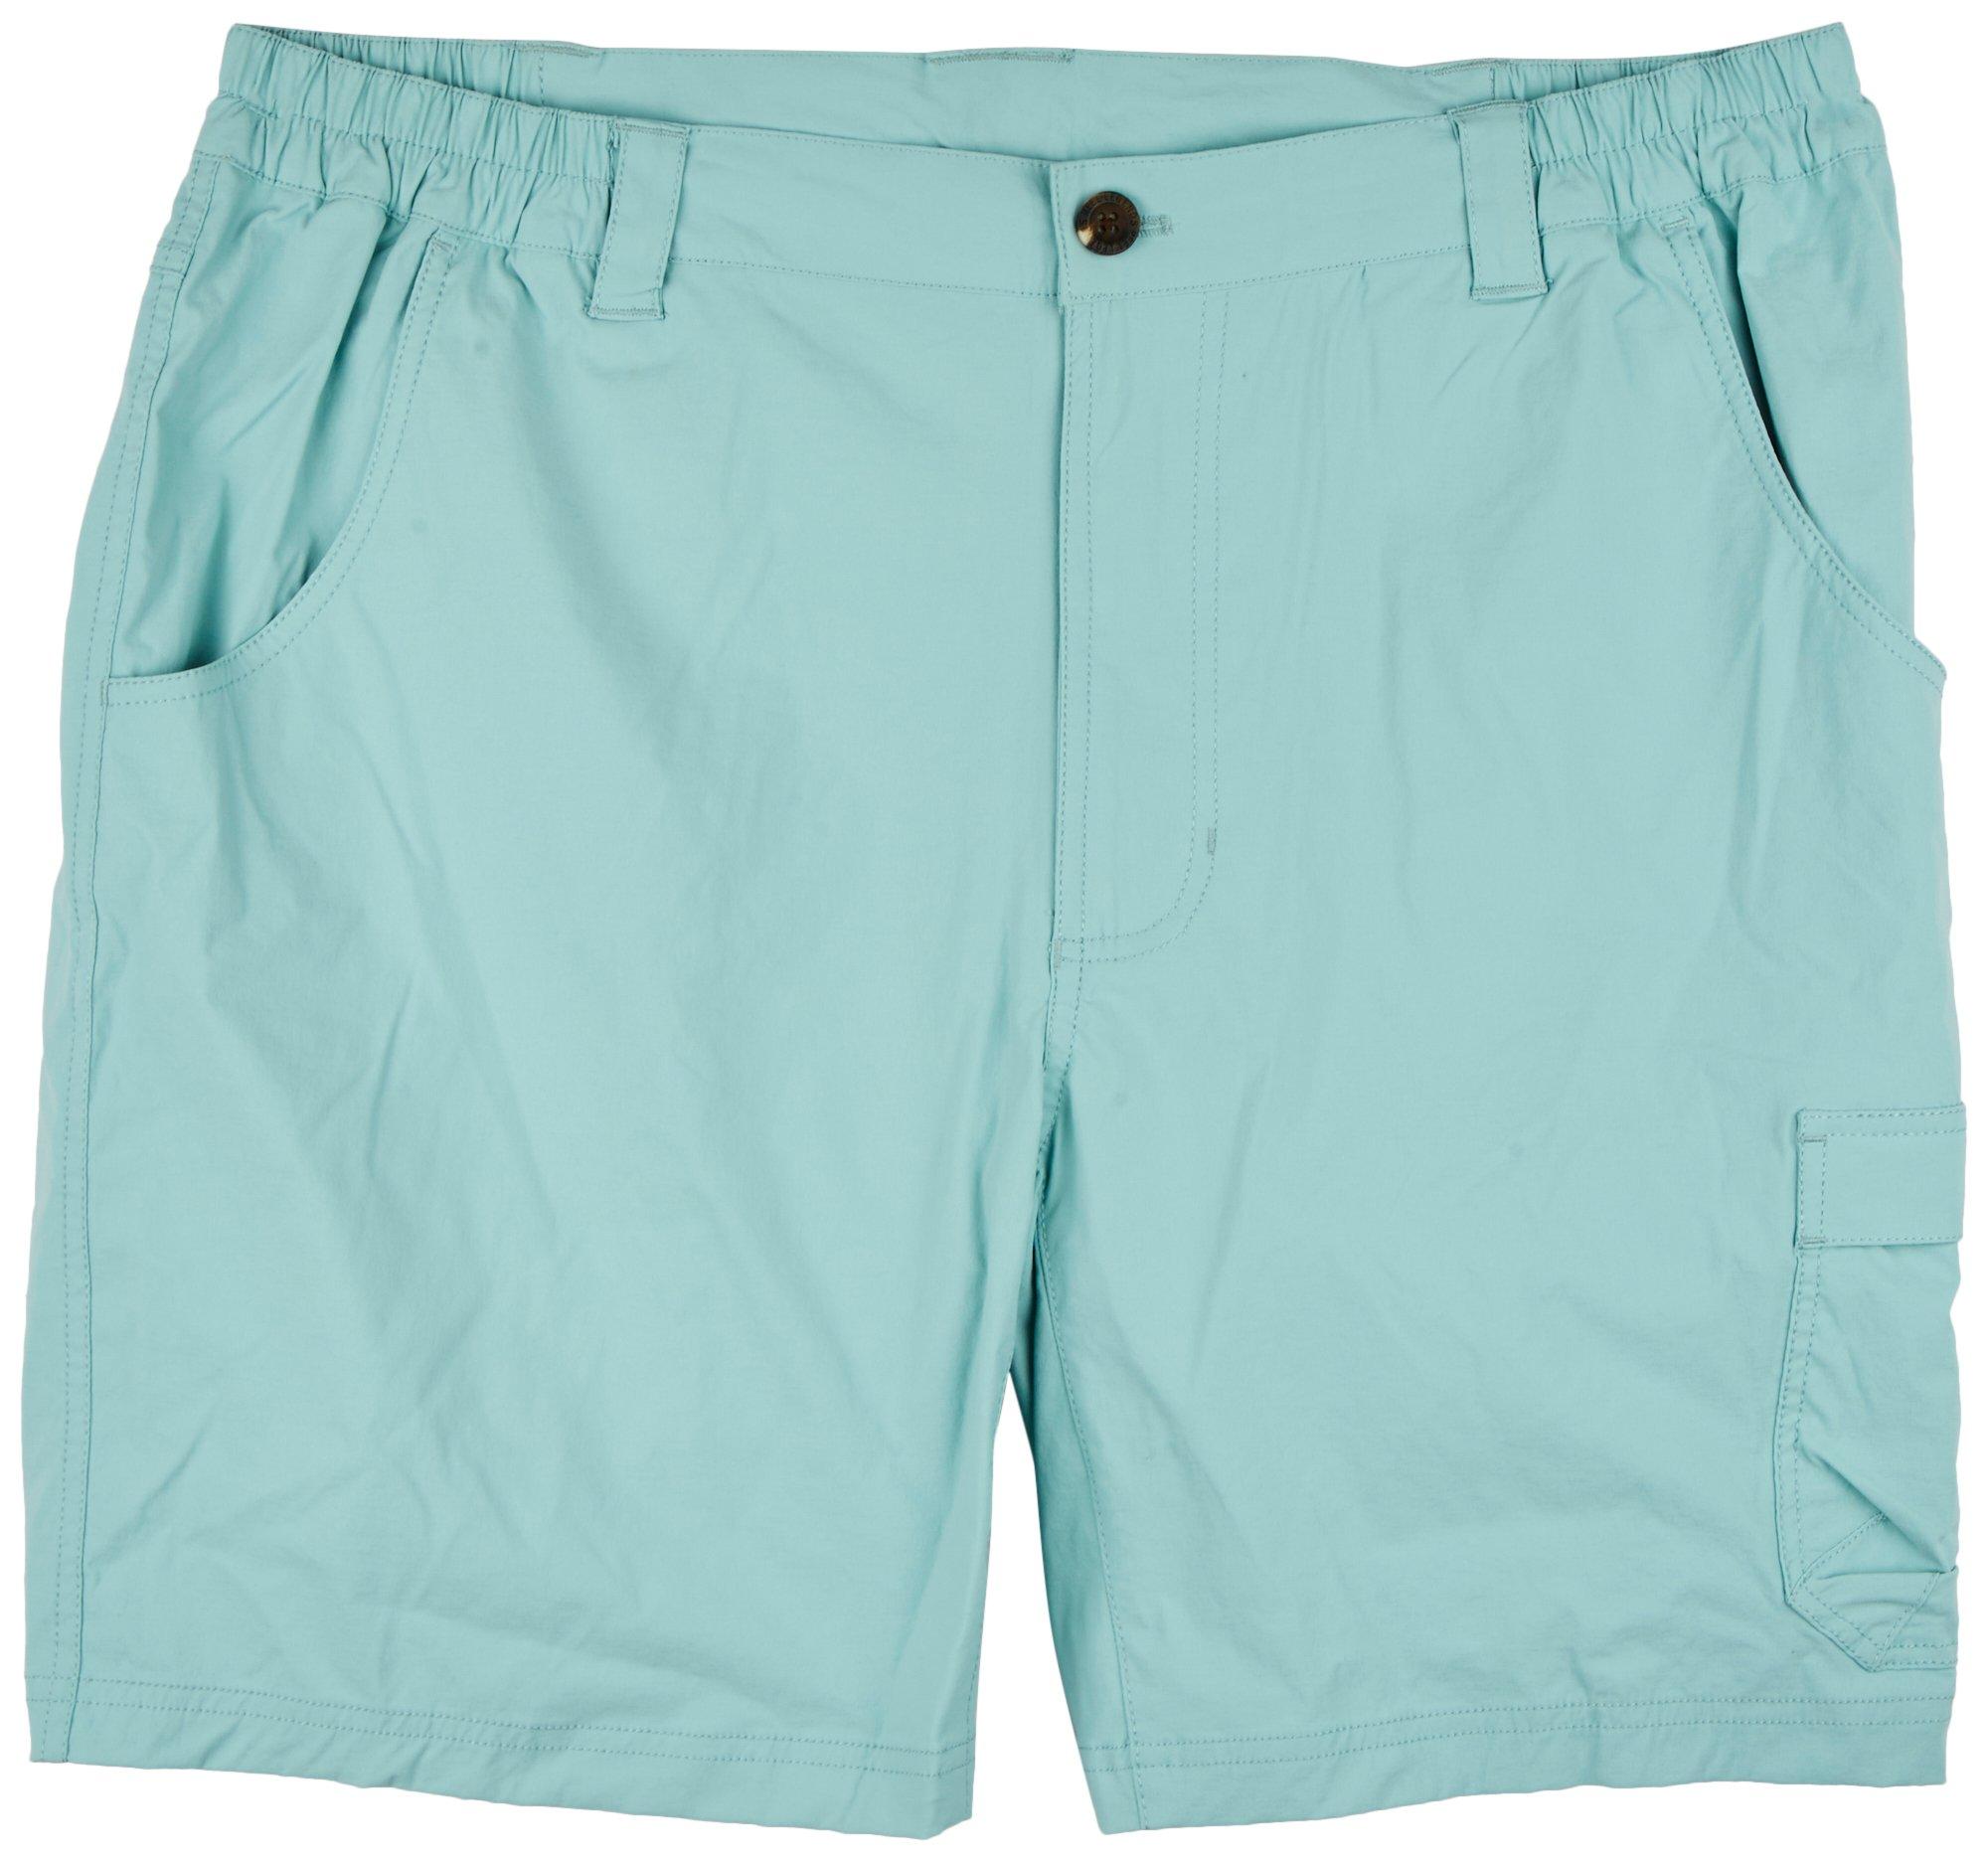 Mens 7.5 in. Trail Marker Shorts